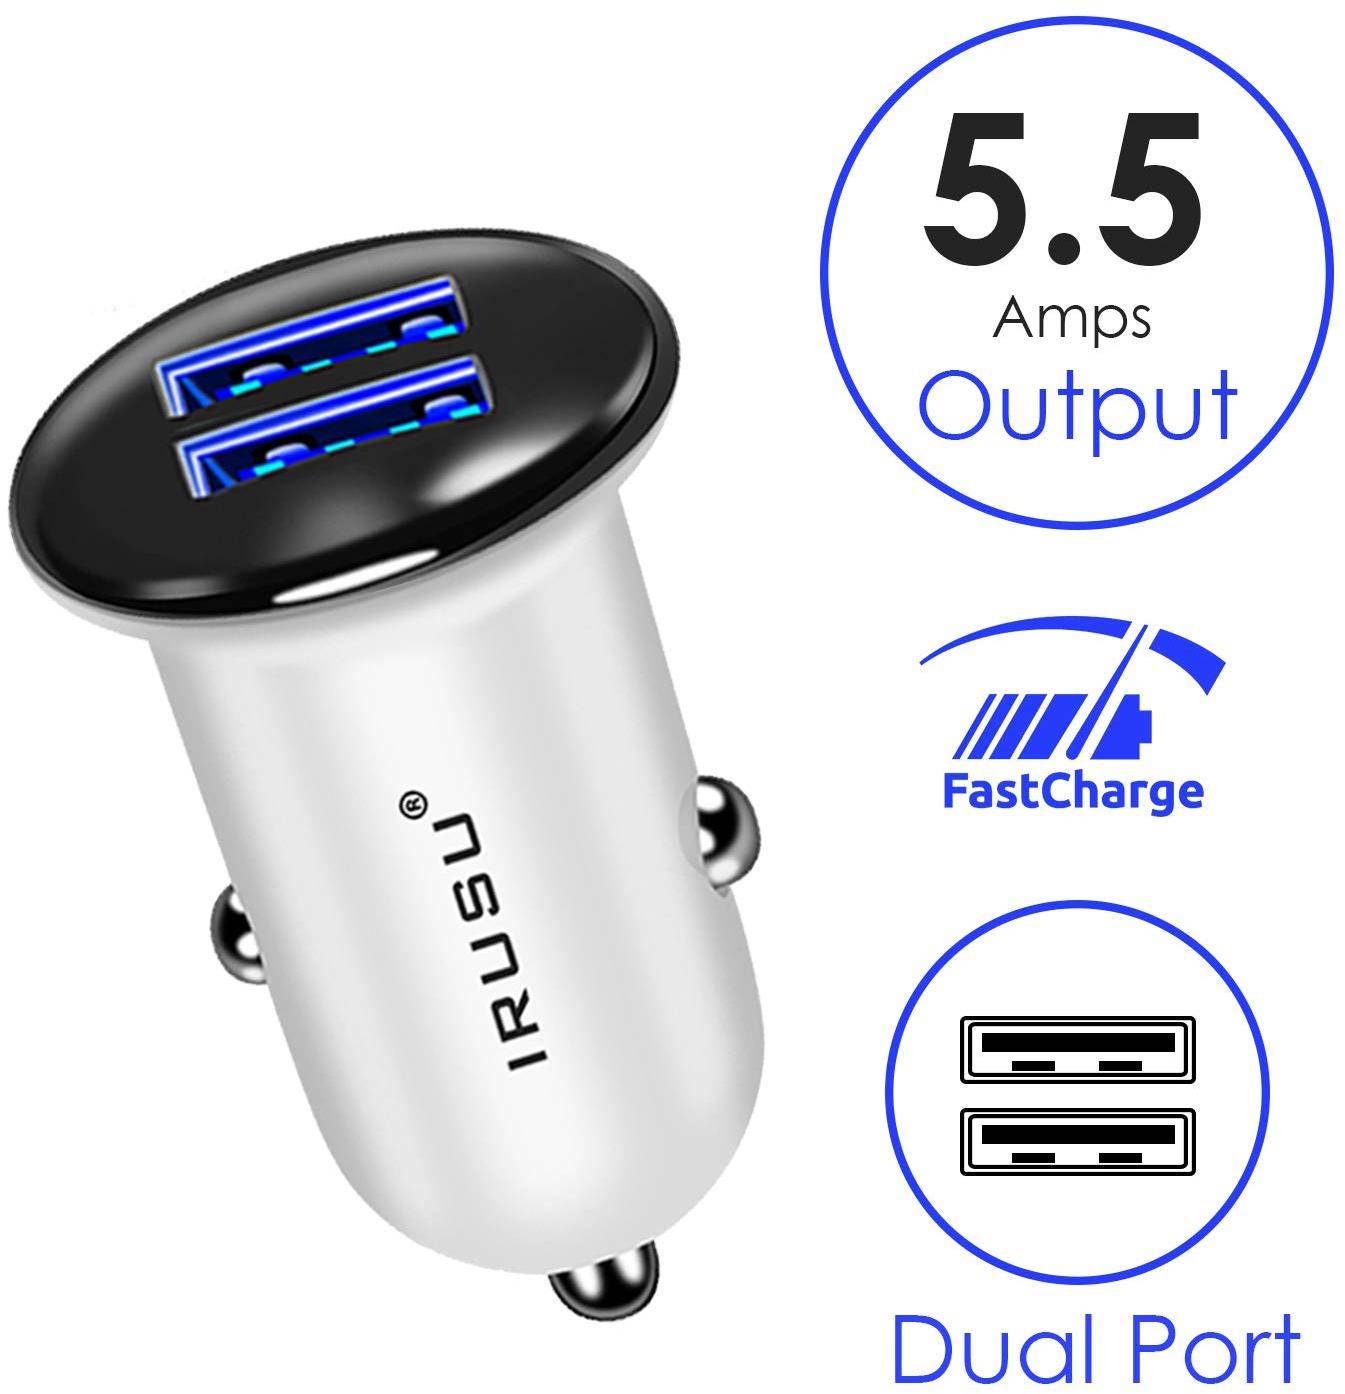 Irusu 5.5 Amps Fast Charging Car Charger with Two Ports zoom image